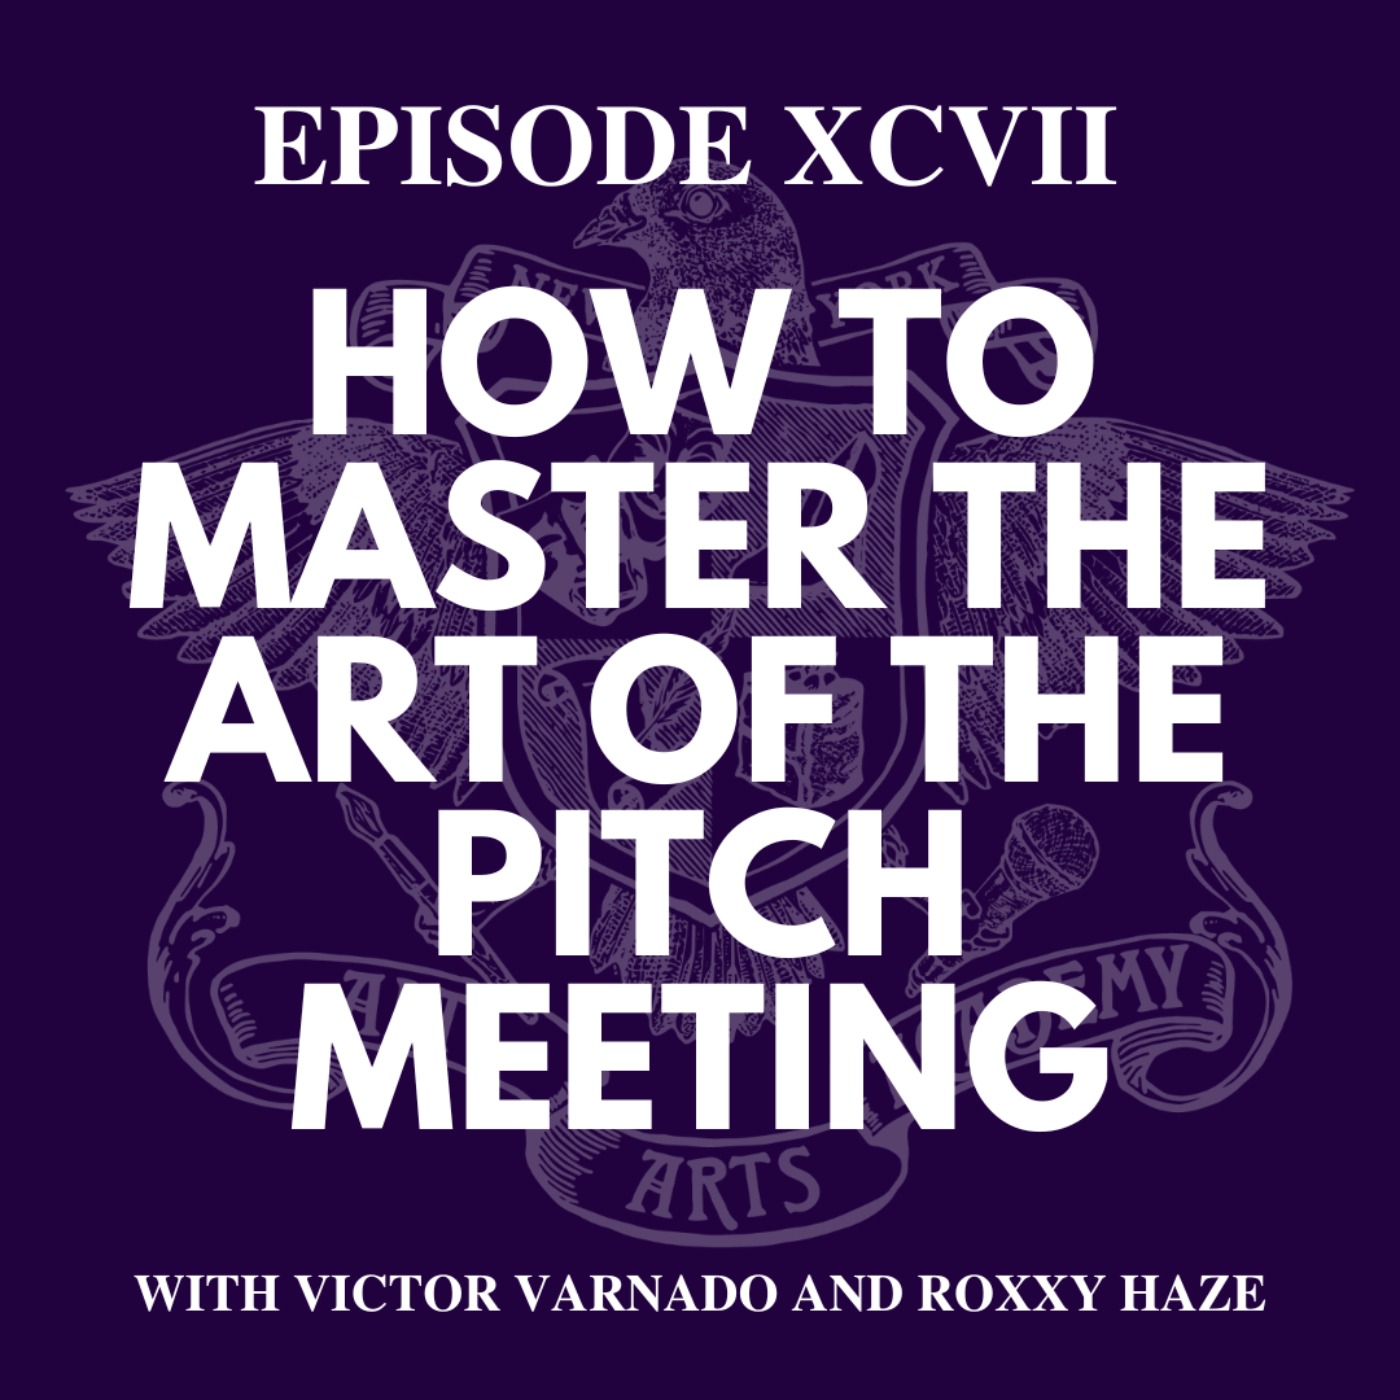 How to Master the Art of the Pitch Meeting